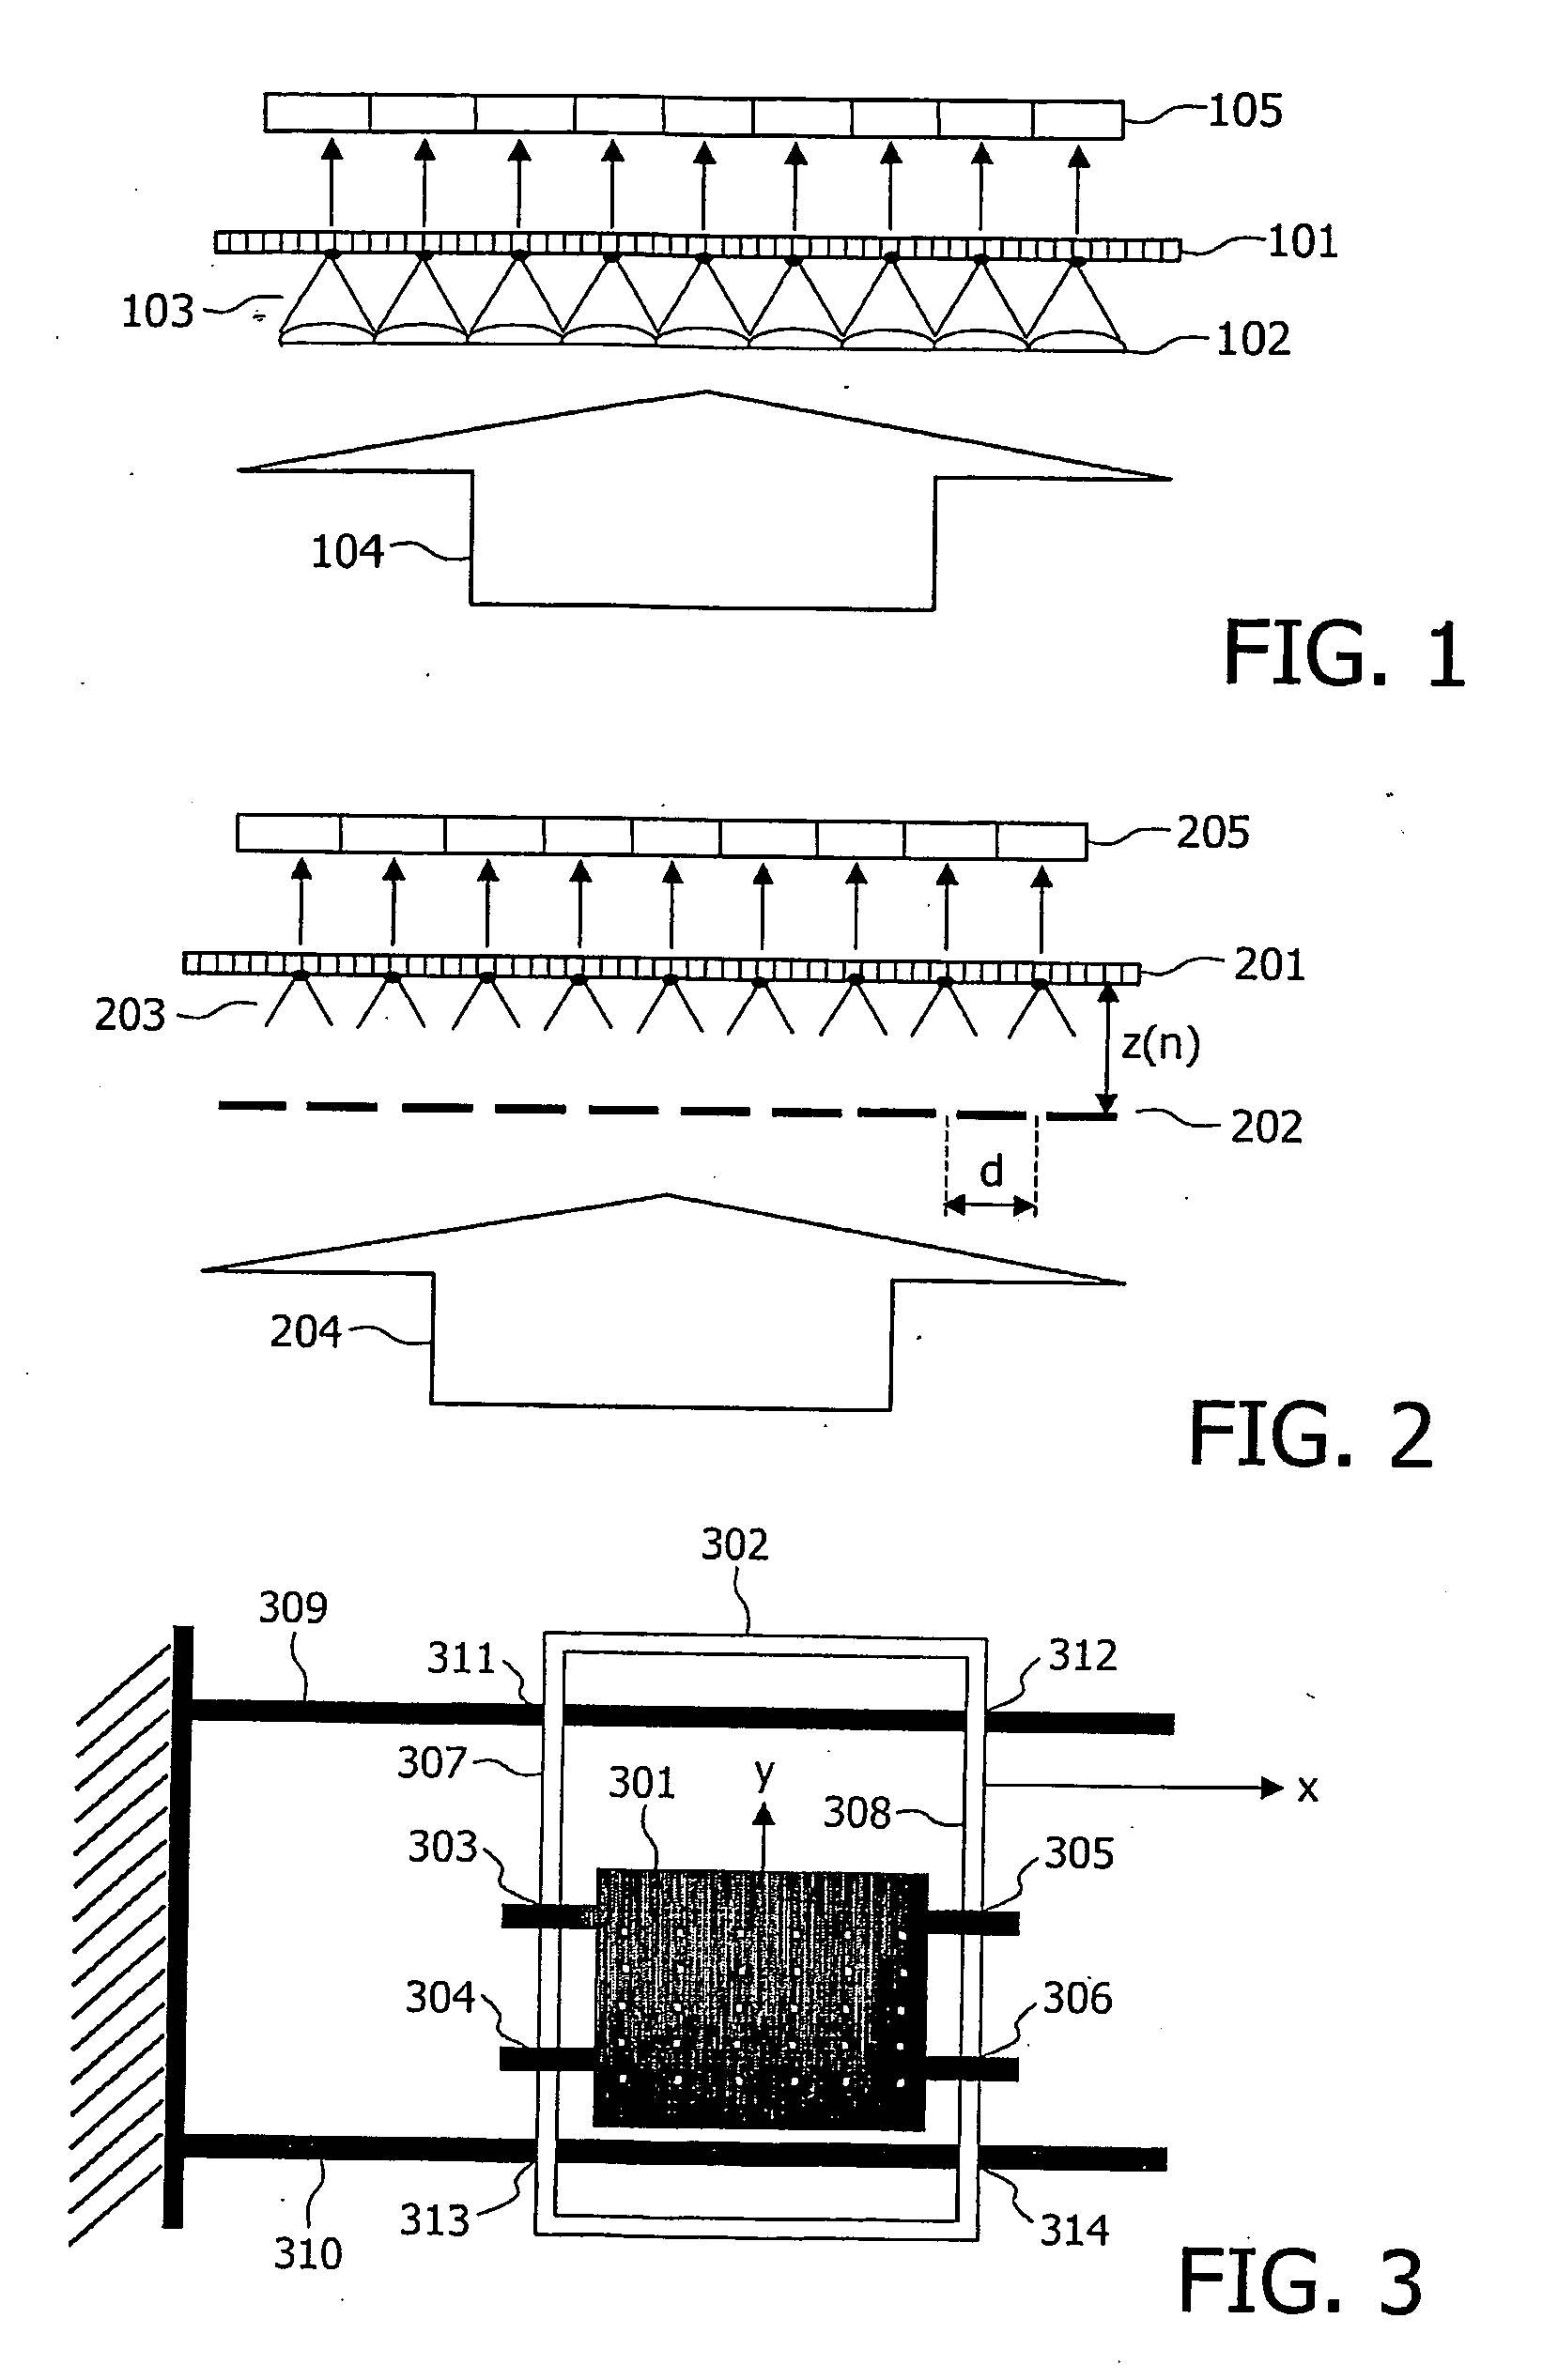 Optical device for scanning an information carrier